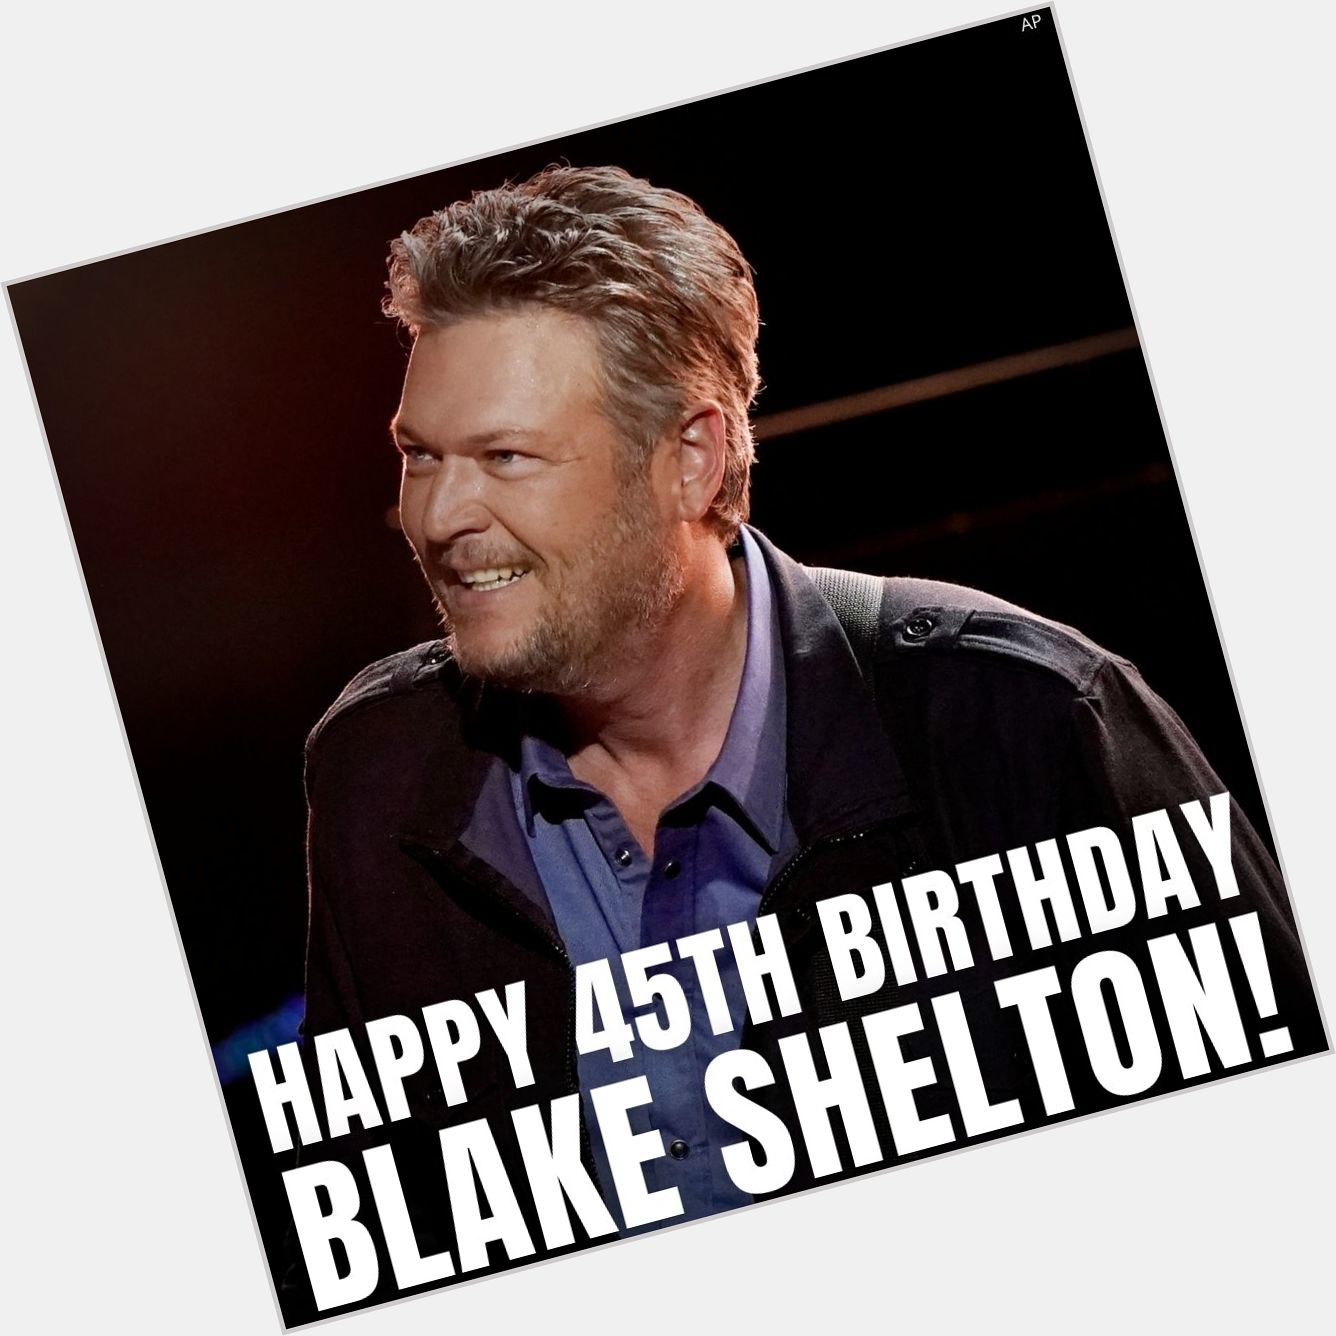 Happy Birthday to a host on The Voice and country music star... Blake Shelton!! 